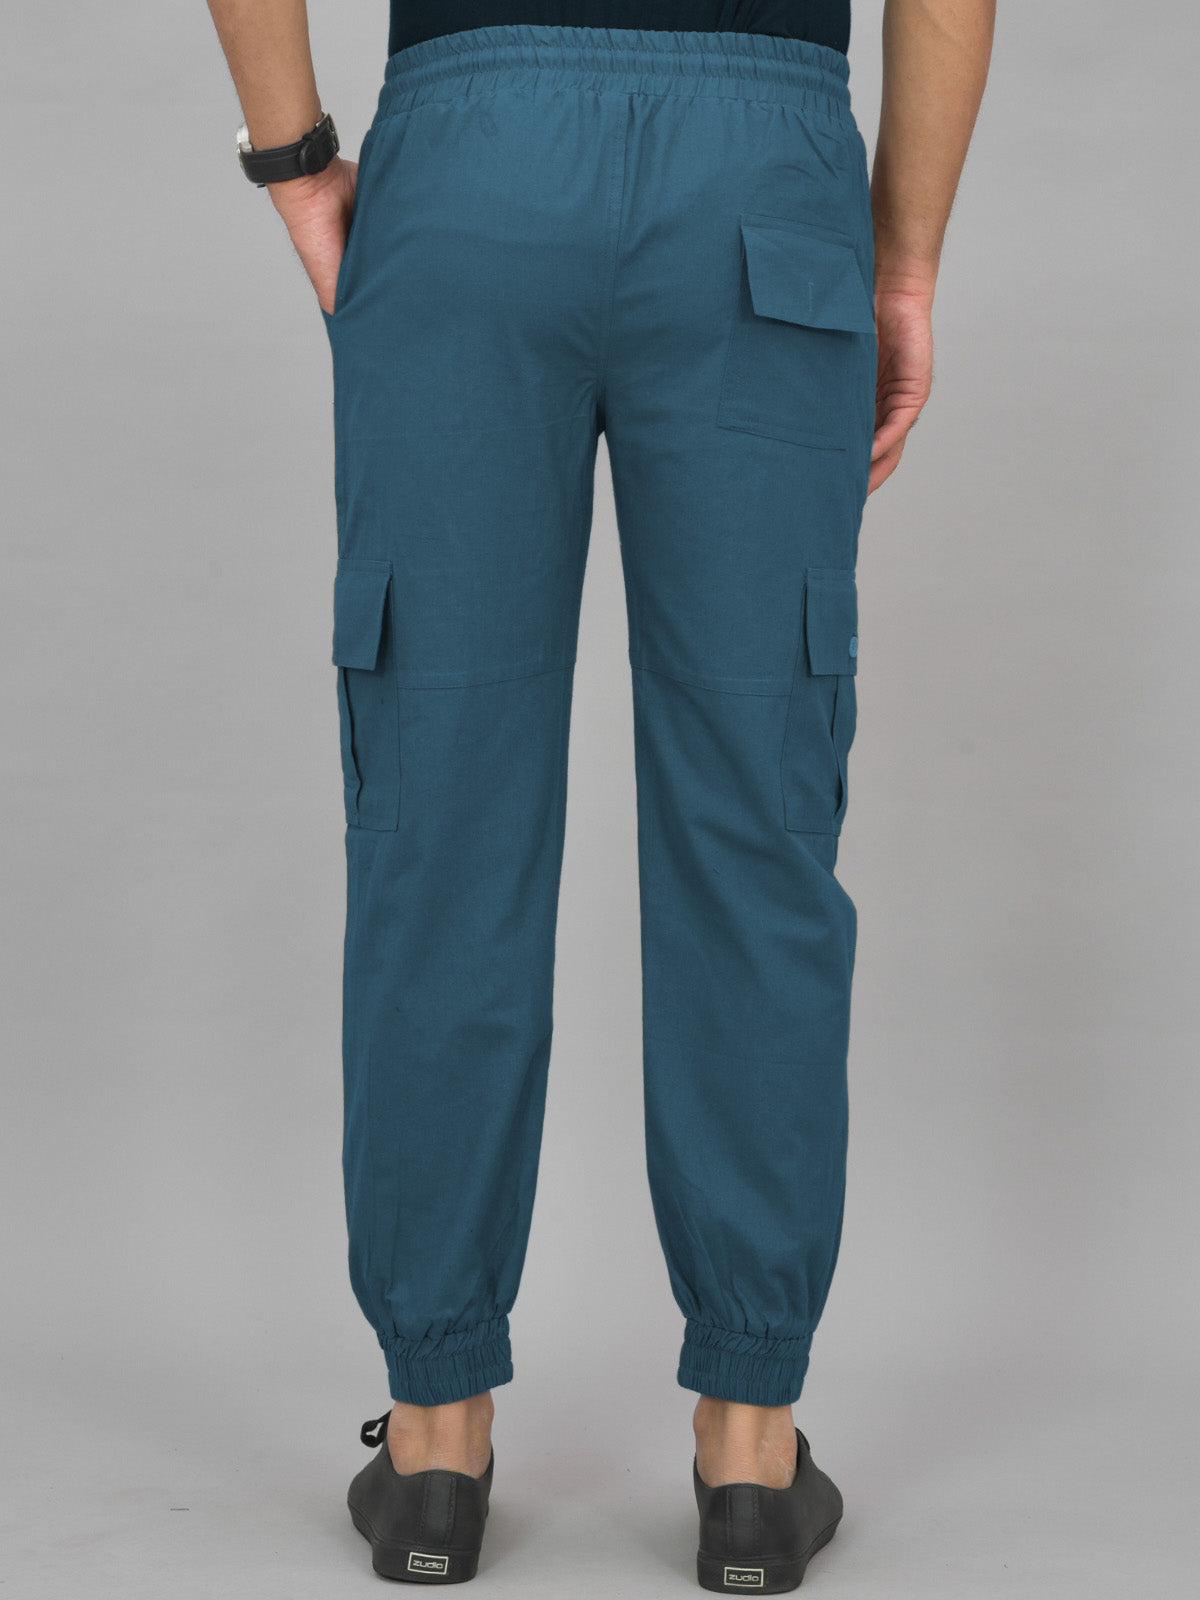 Combo Pack Of Mens Teal Blue And Black Five Pocket Cotton Cargo Pants